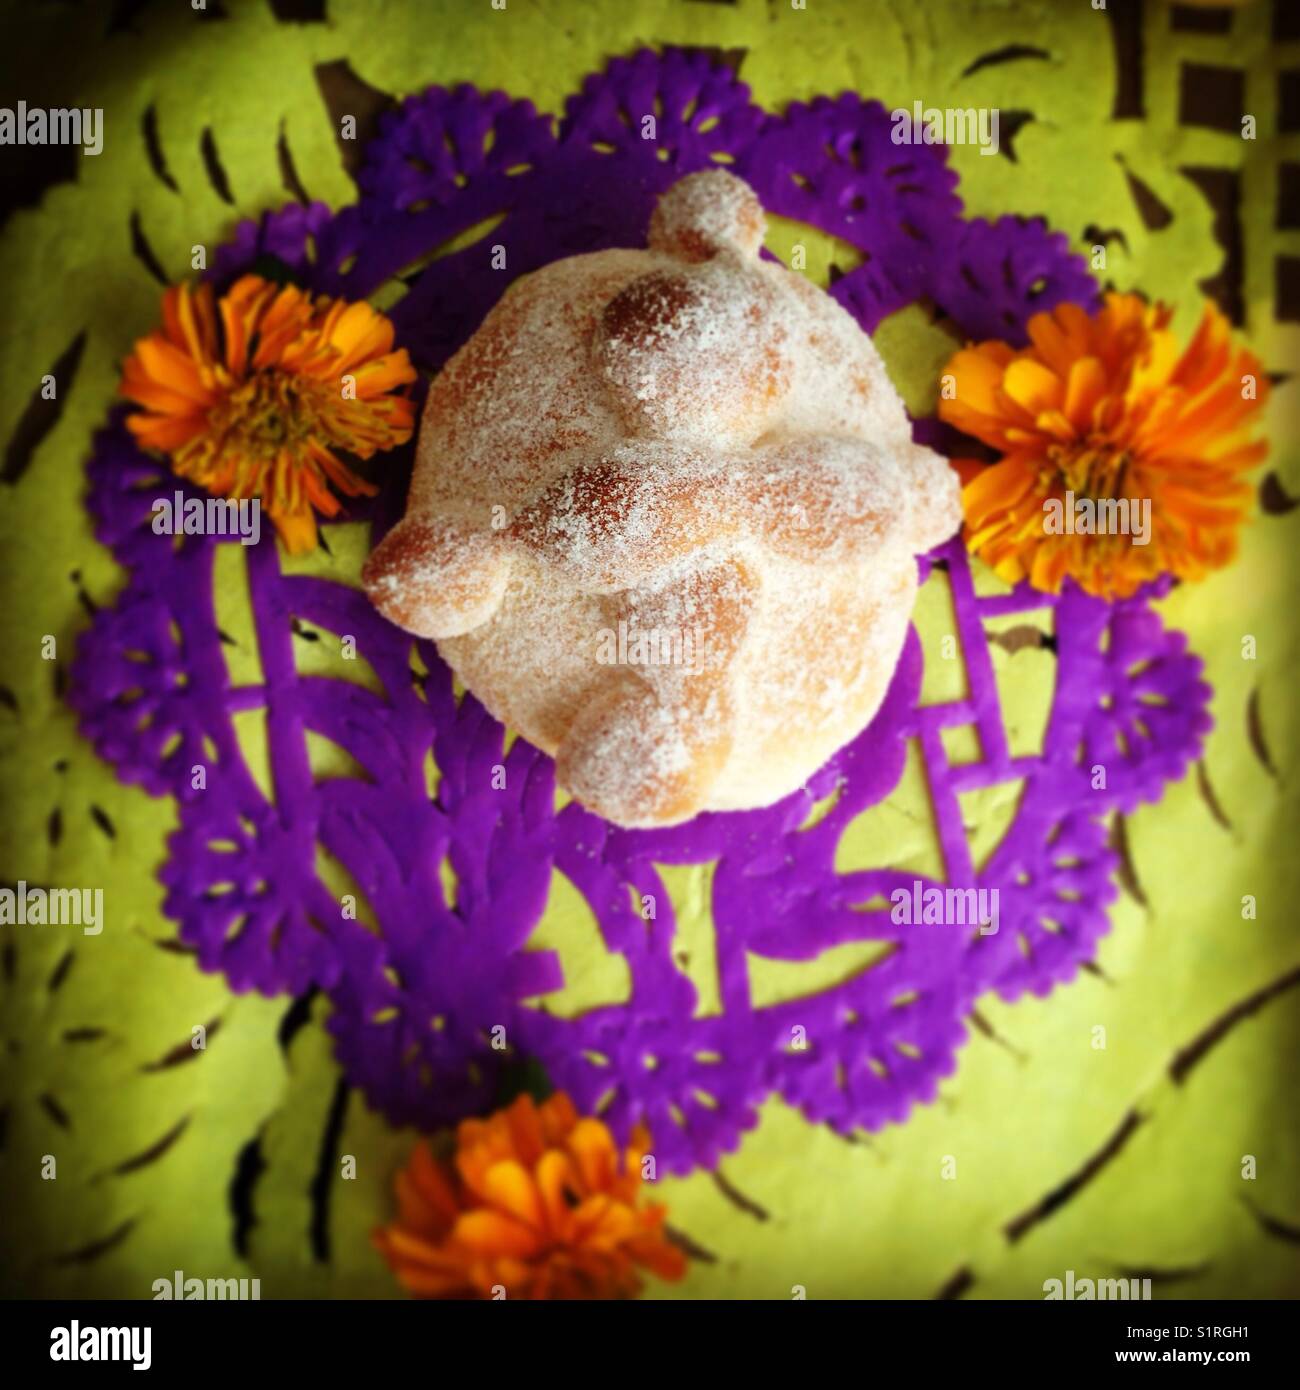 'Pan de Muerto' sweet bread sits on a Day of the Dead altar, along with merigold flowers and paper cut-outs in Mexico City, Tuesday, October 31, 2017. Stock Photo